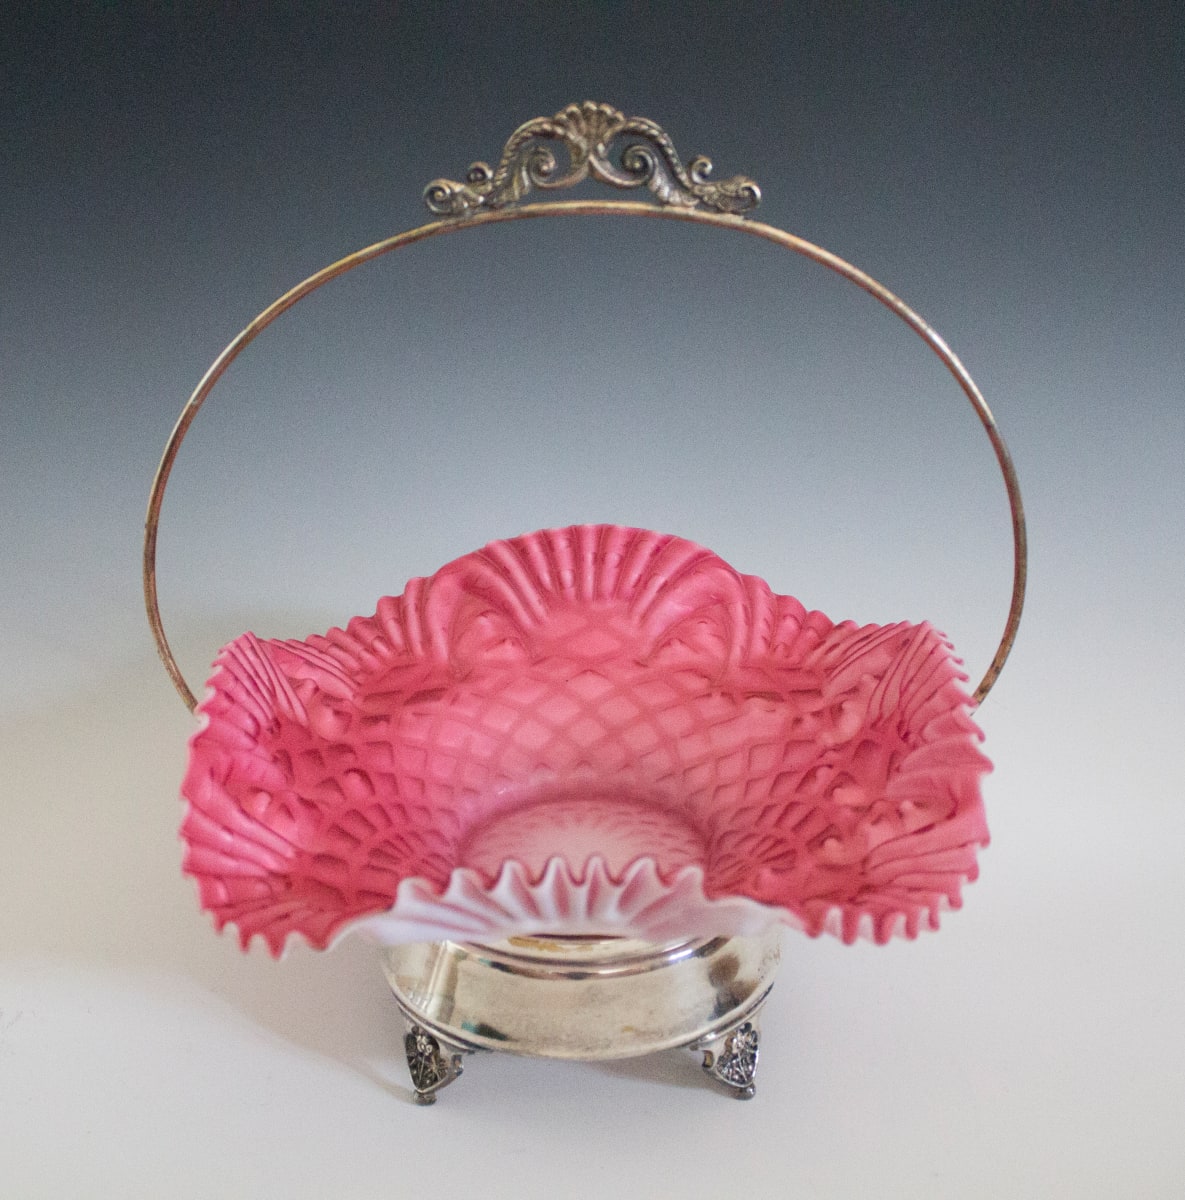 Bride's Bowl by Unknown, United States 